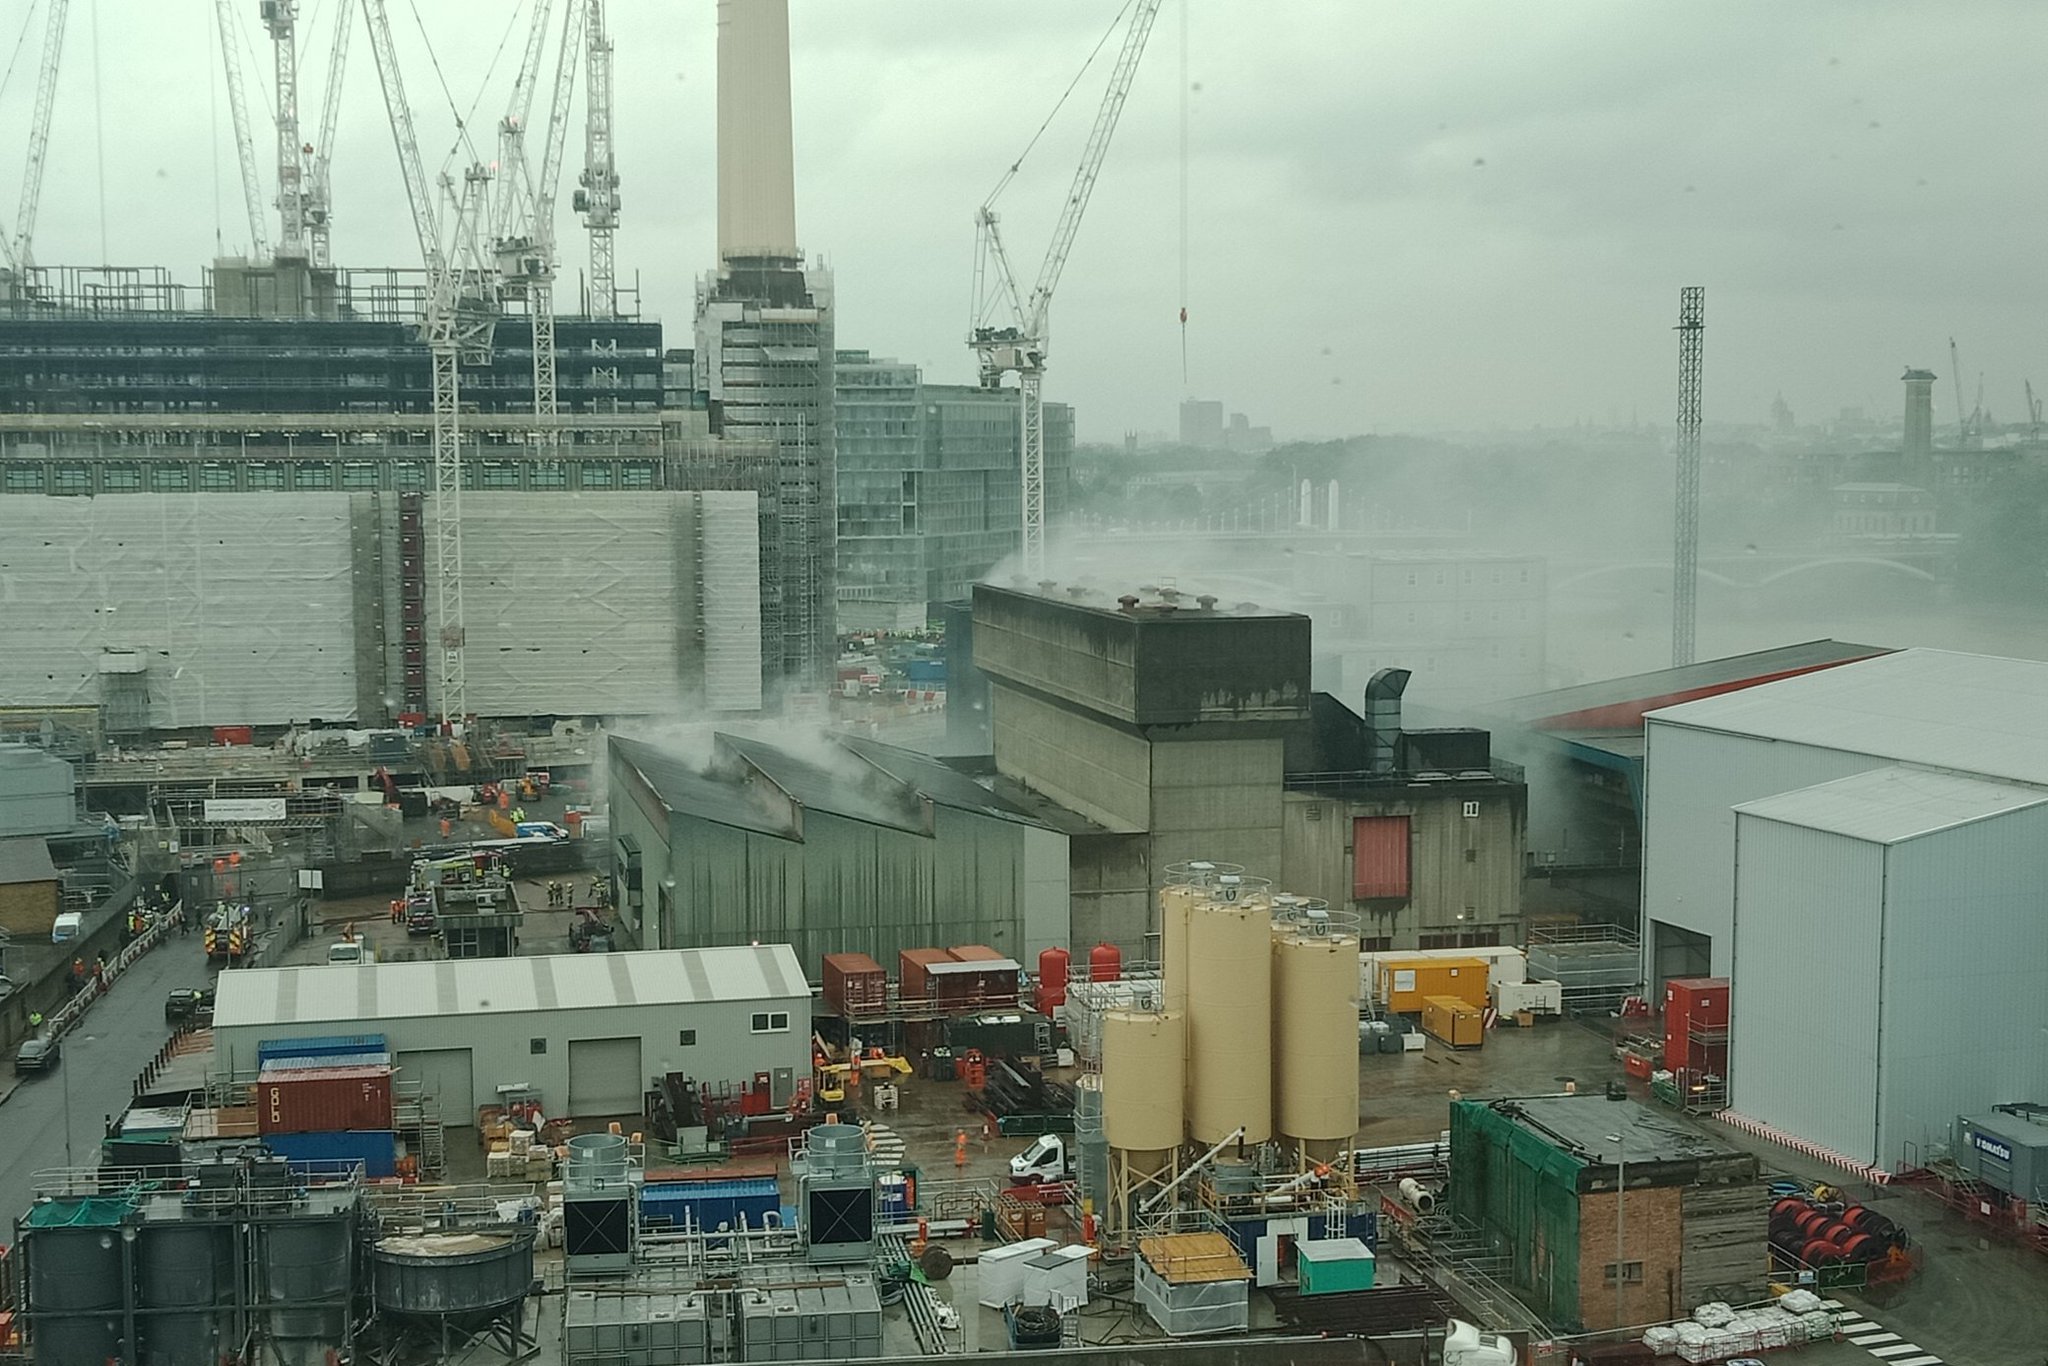 WATCH: Large fire in progress at Battersea waste recycling plant